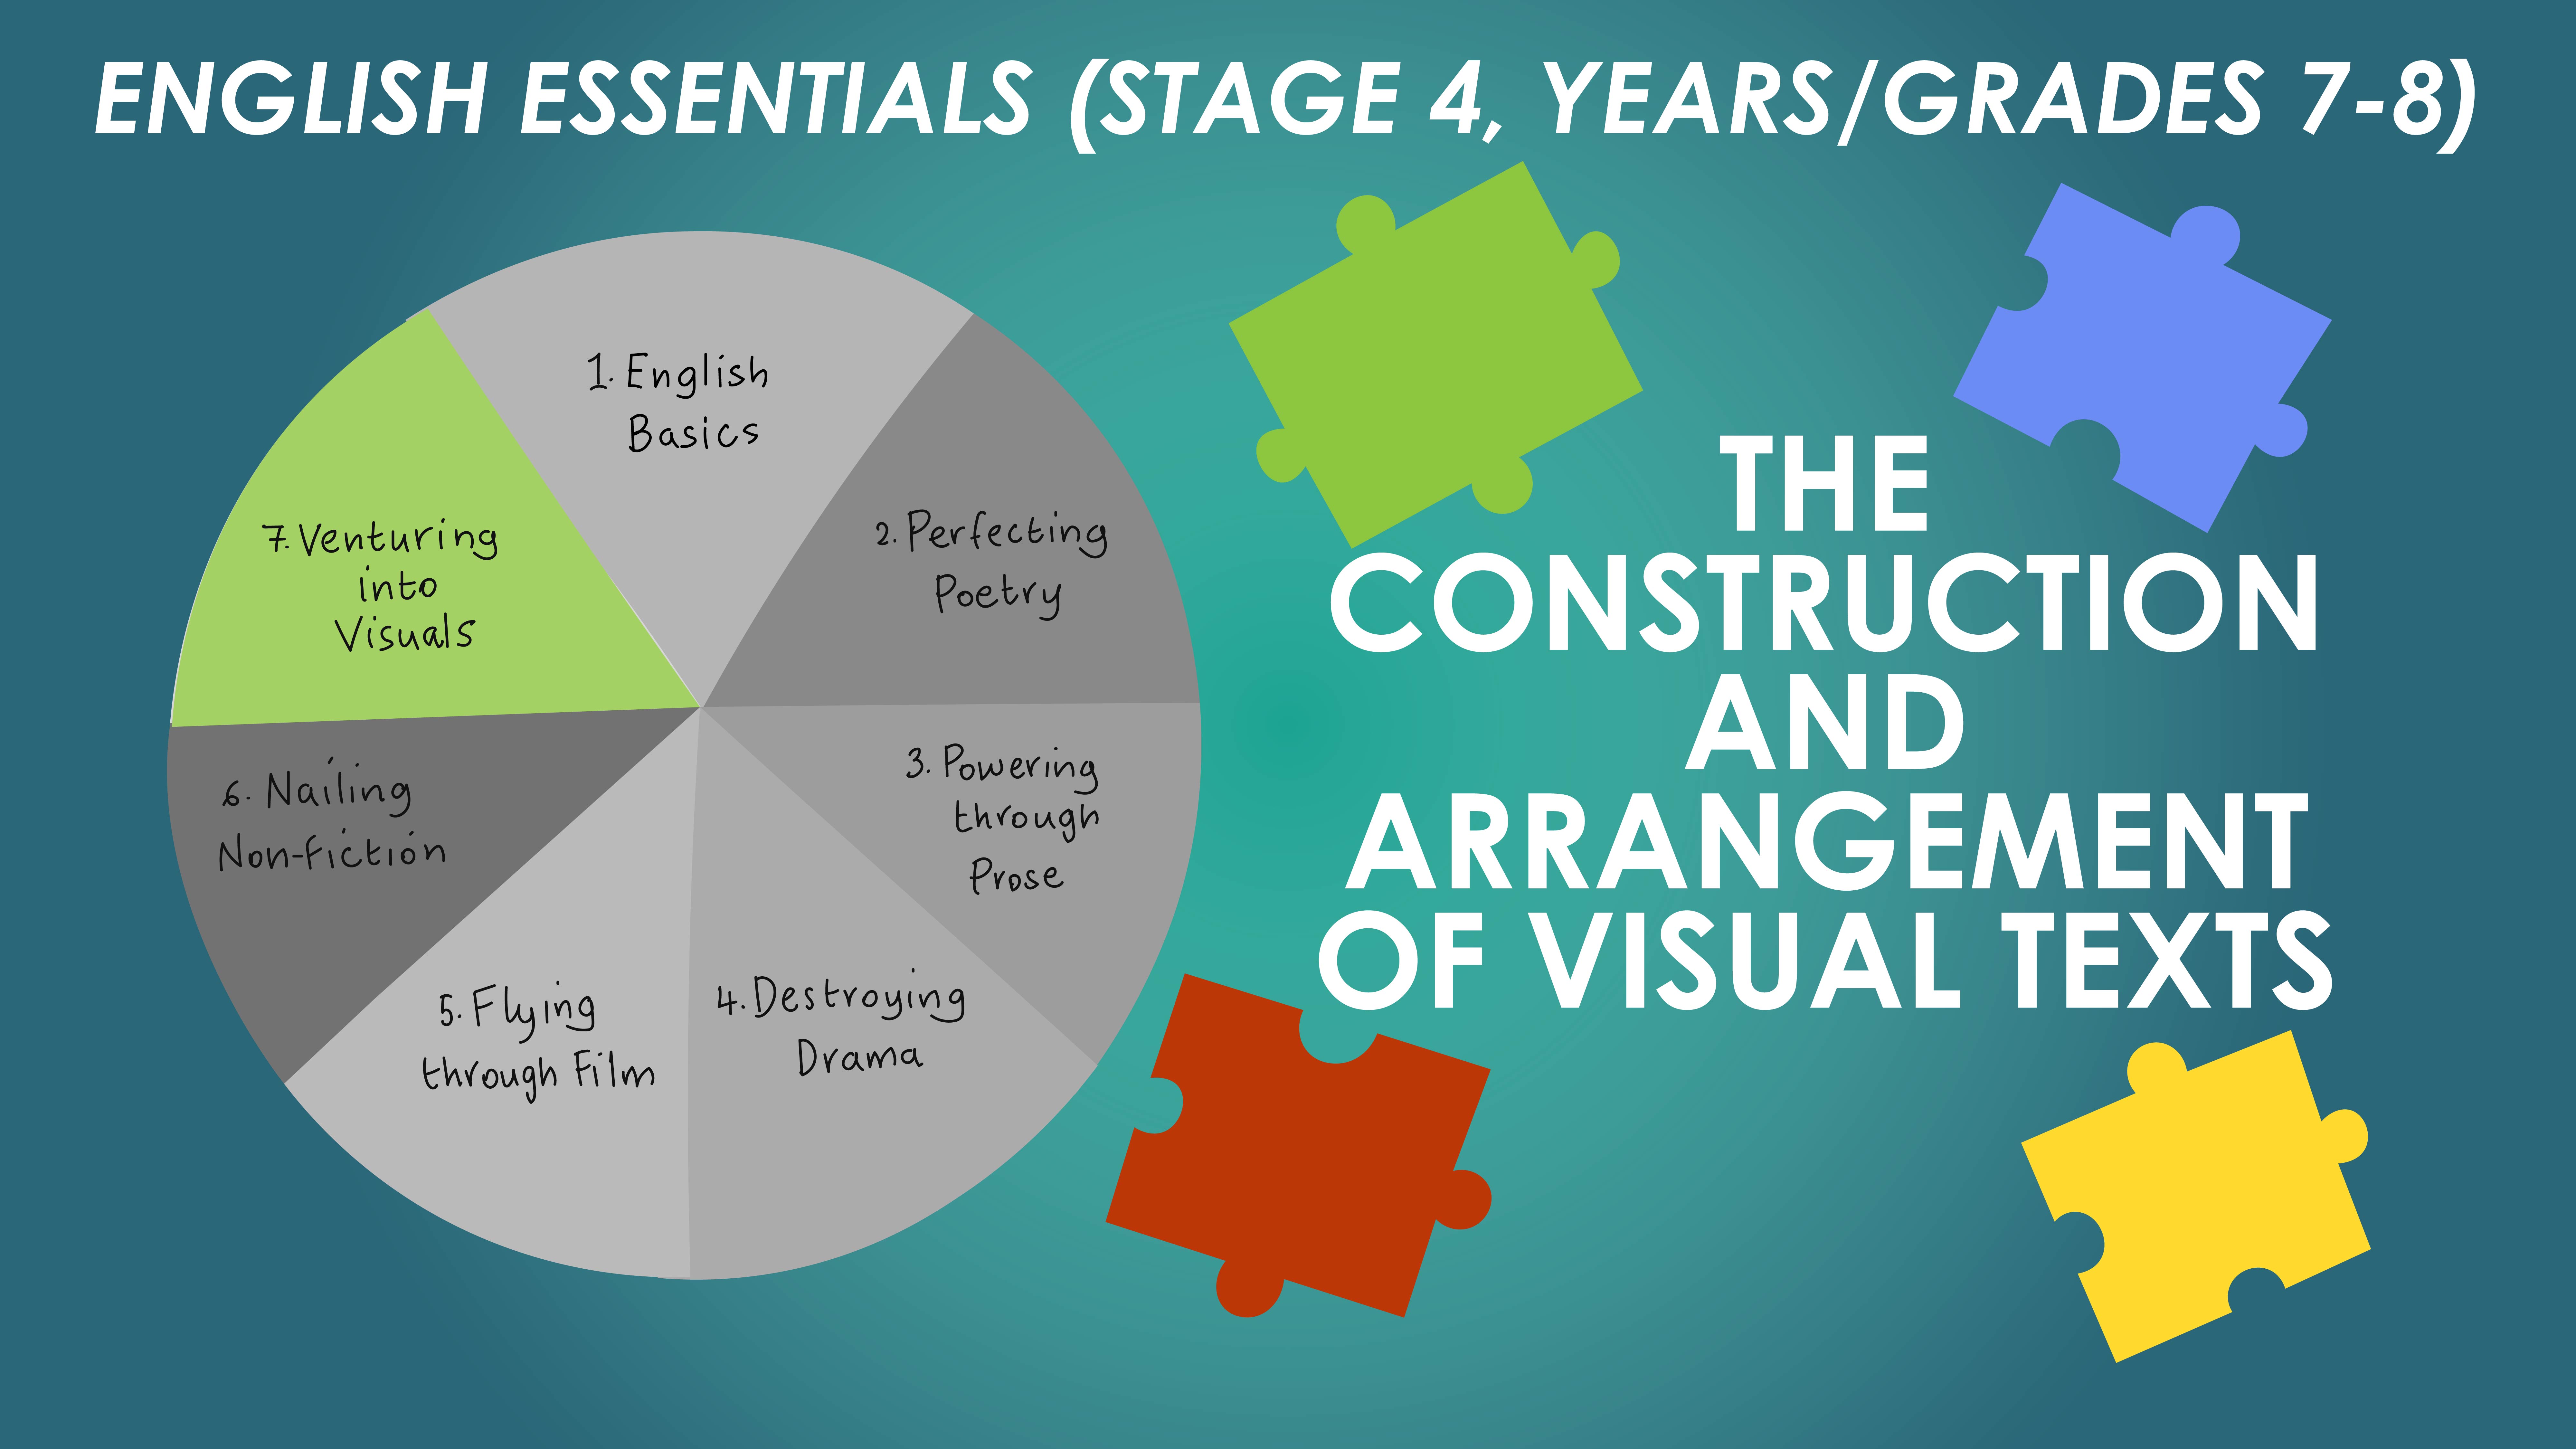 English Essentials - Venturing into Visuals – The Construction and Arrangement of Visual Texts (Stage 4, Years/Grades 7-8)